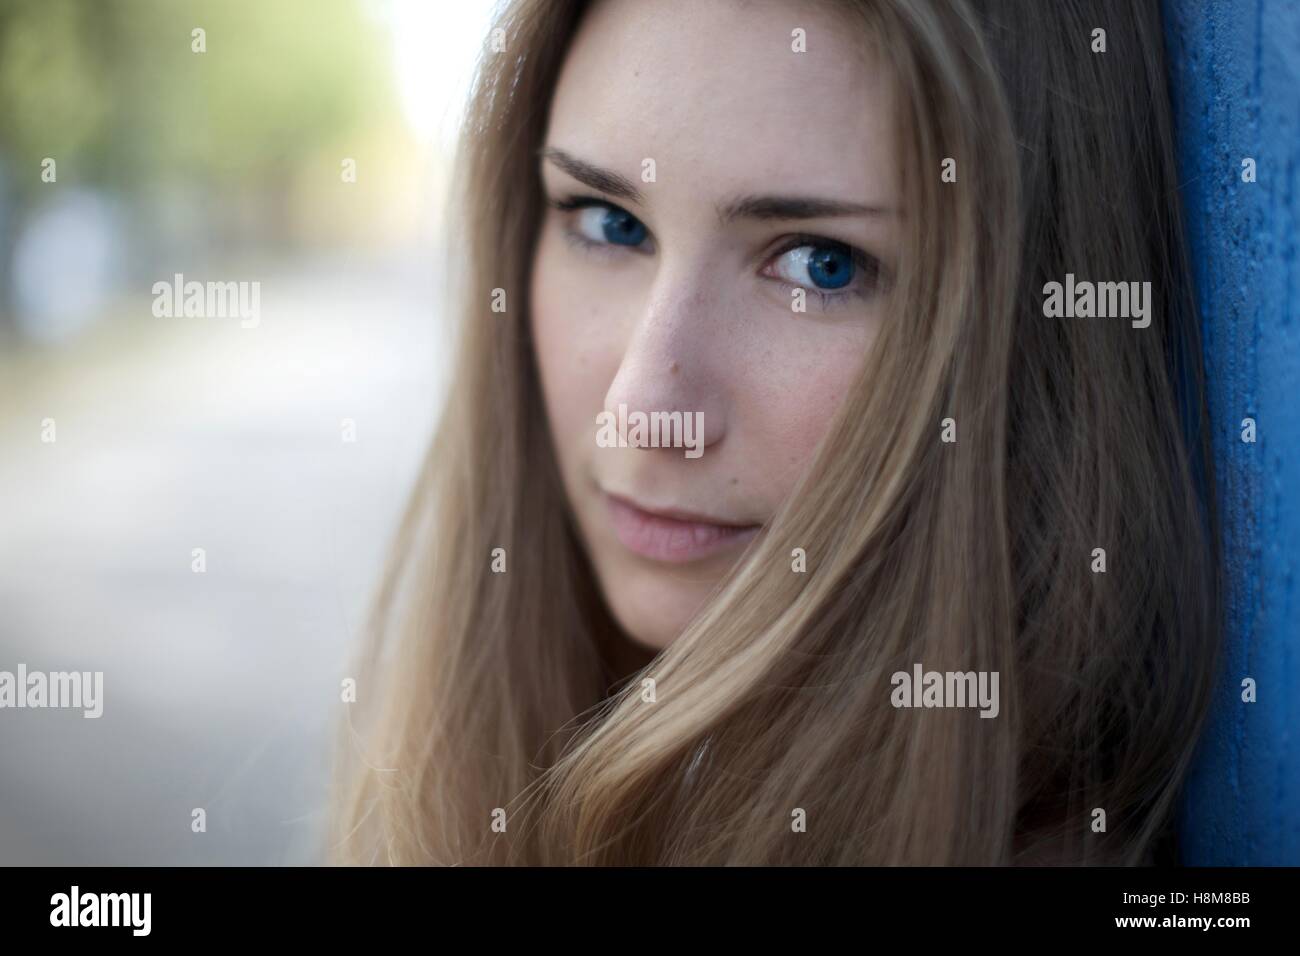 Closeup Blondie 23 year old in blue dress Stock Photo